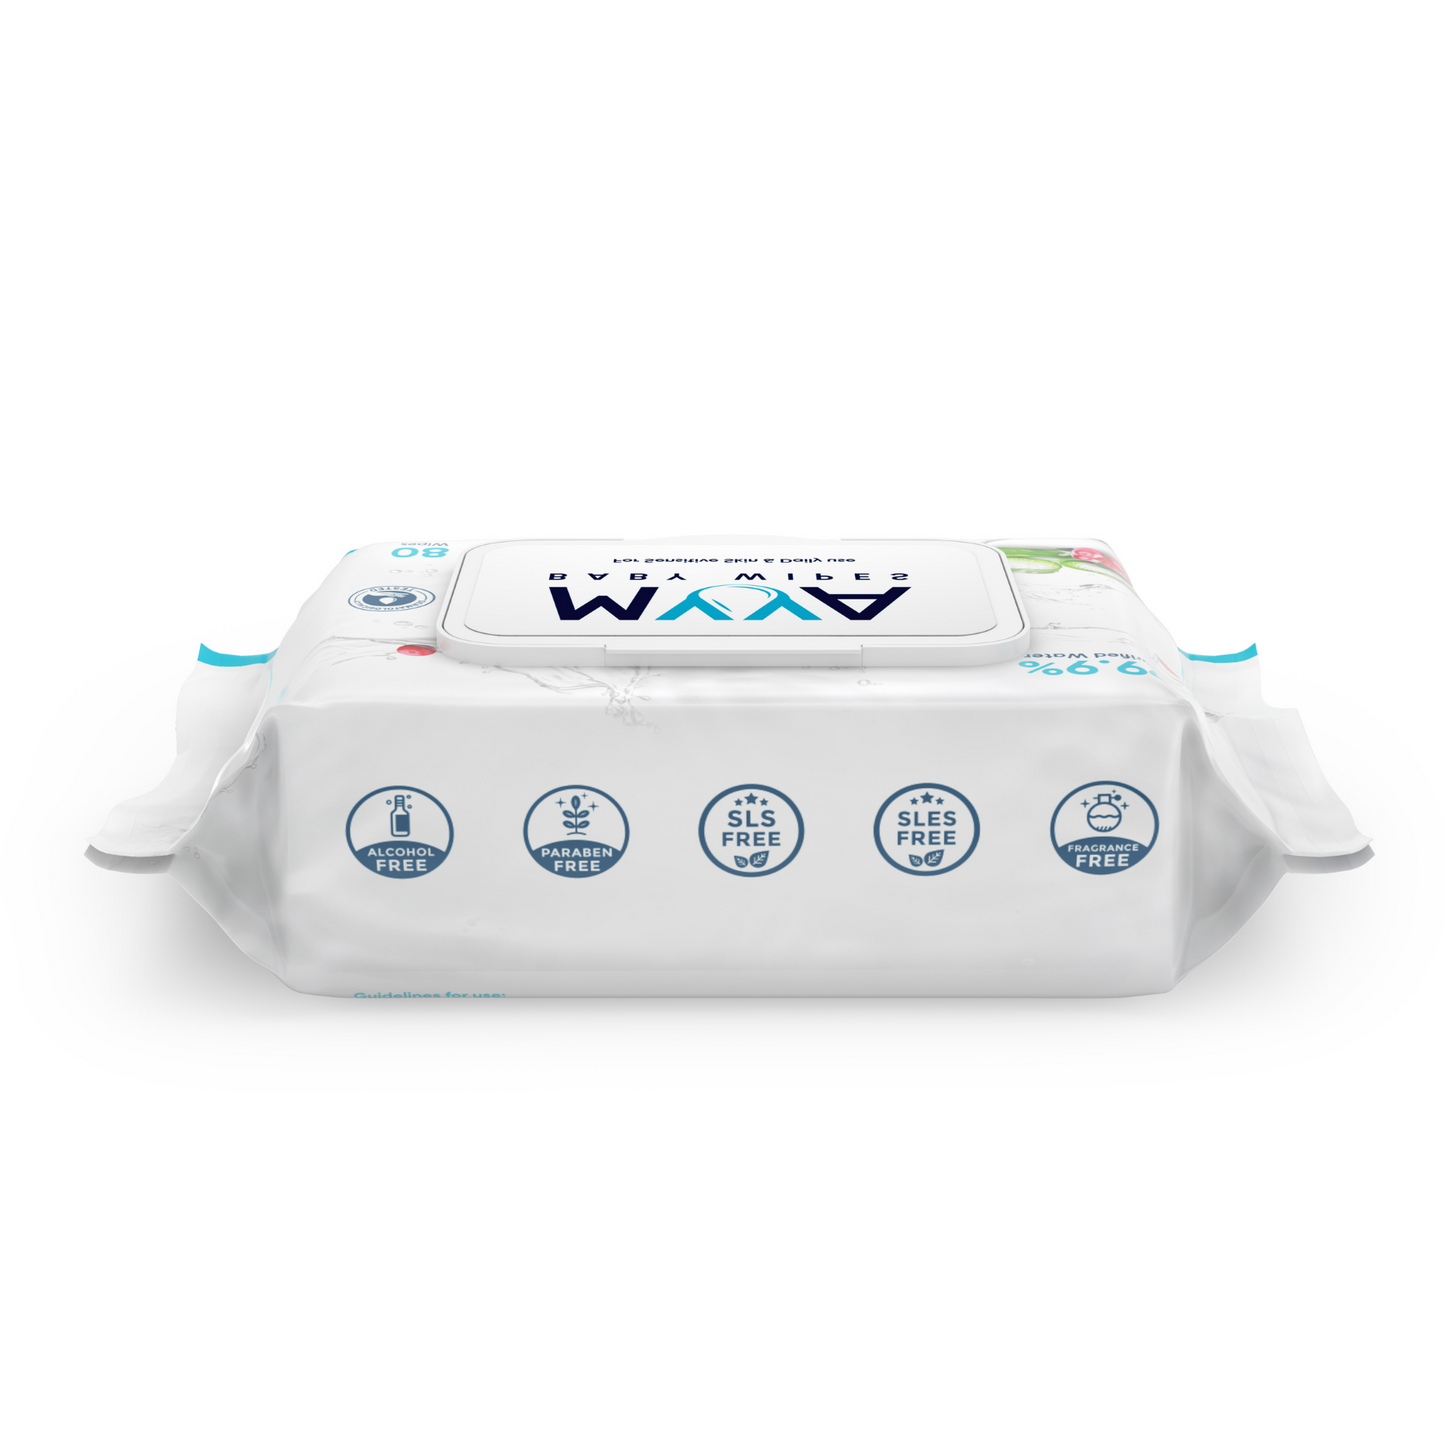 Myya Baby Wipes: Biodegradable and Chemical-Free, 80 Sheet Count